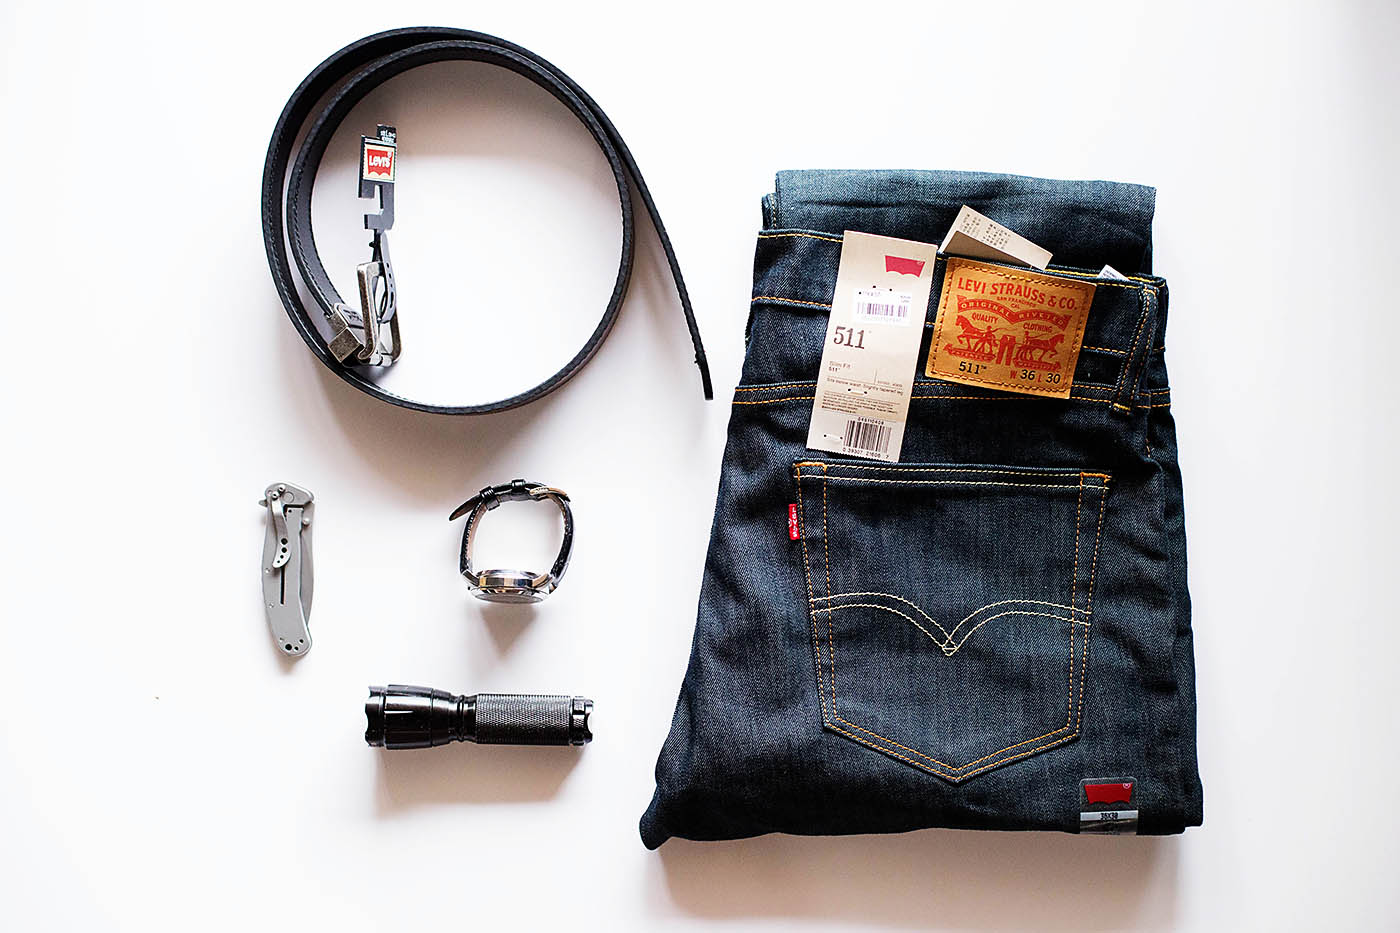 Levi’s® Father's Day gift idea with personalized belt